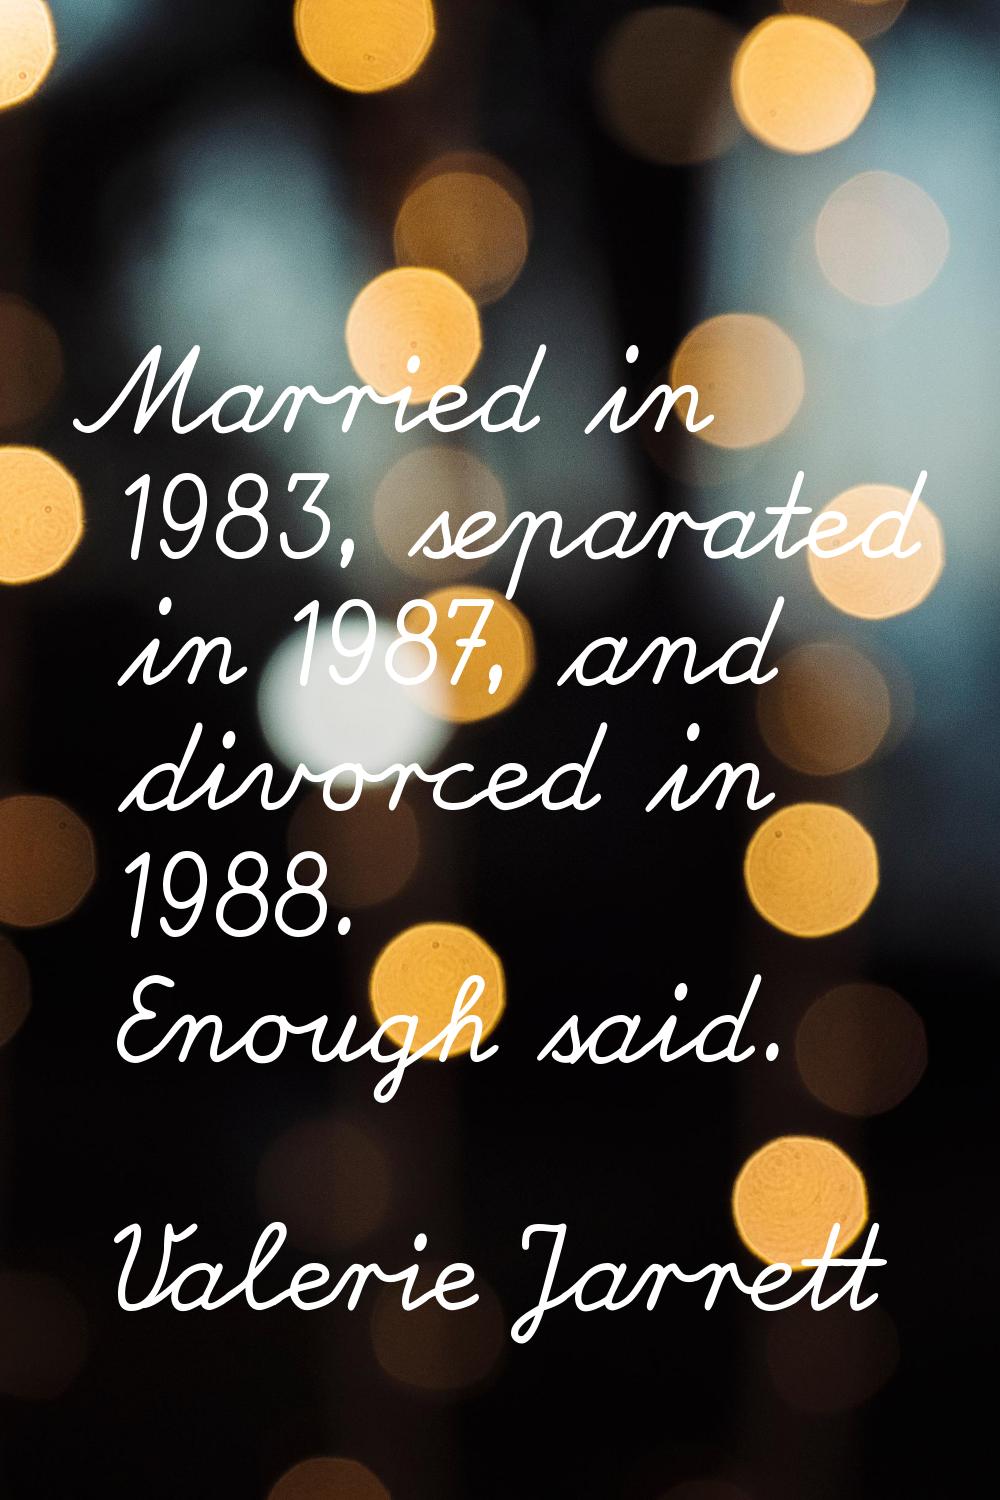 Married in 1983, separated in 1987, and divorced in 1988. Enough said.